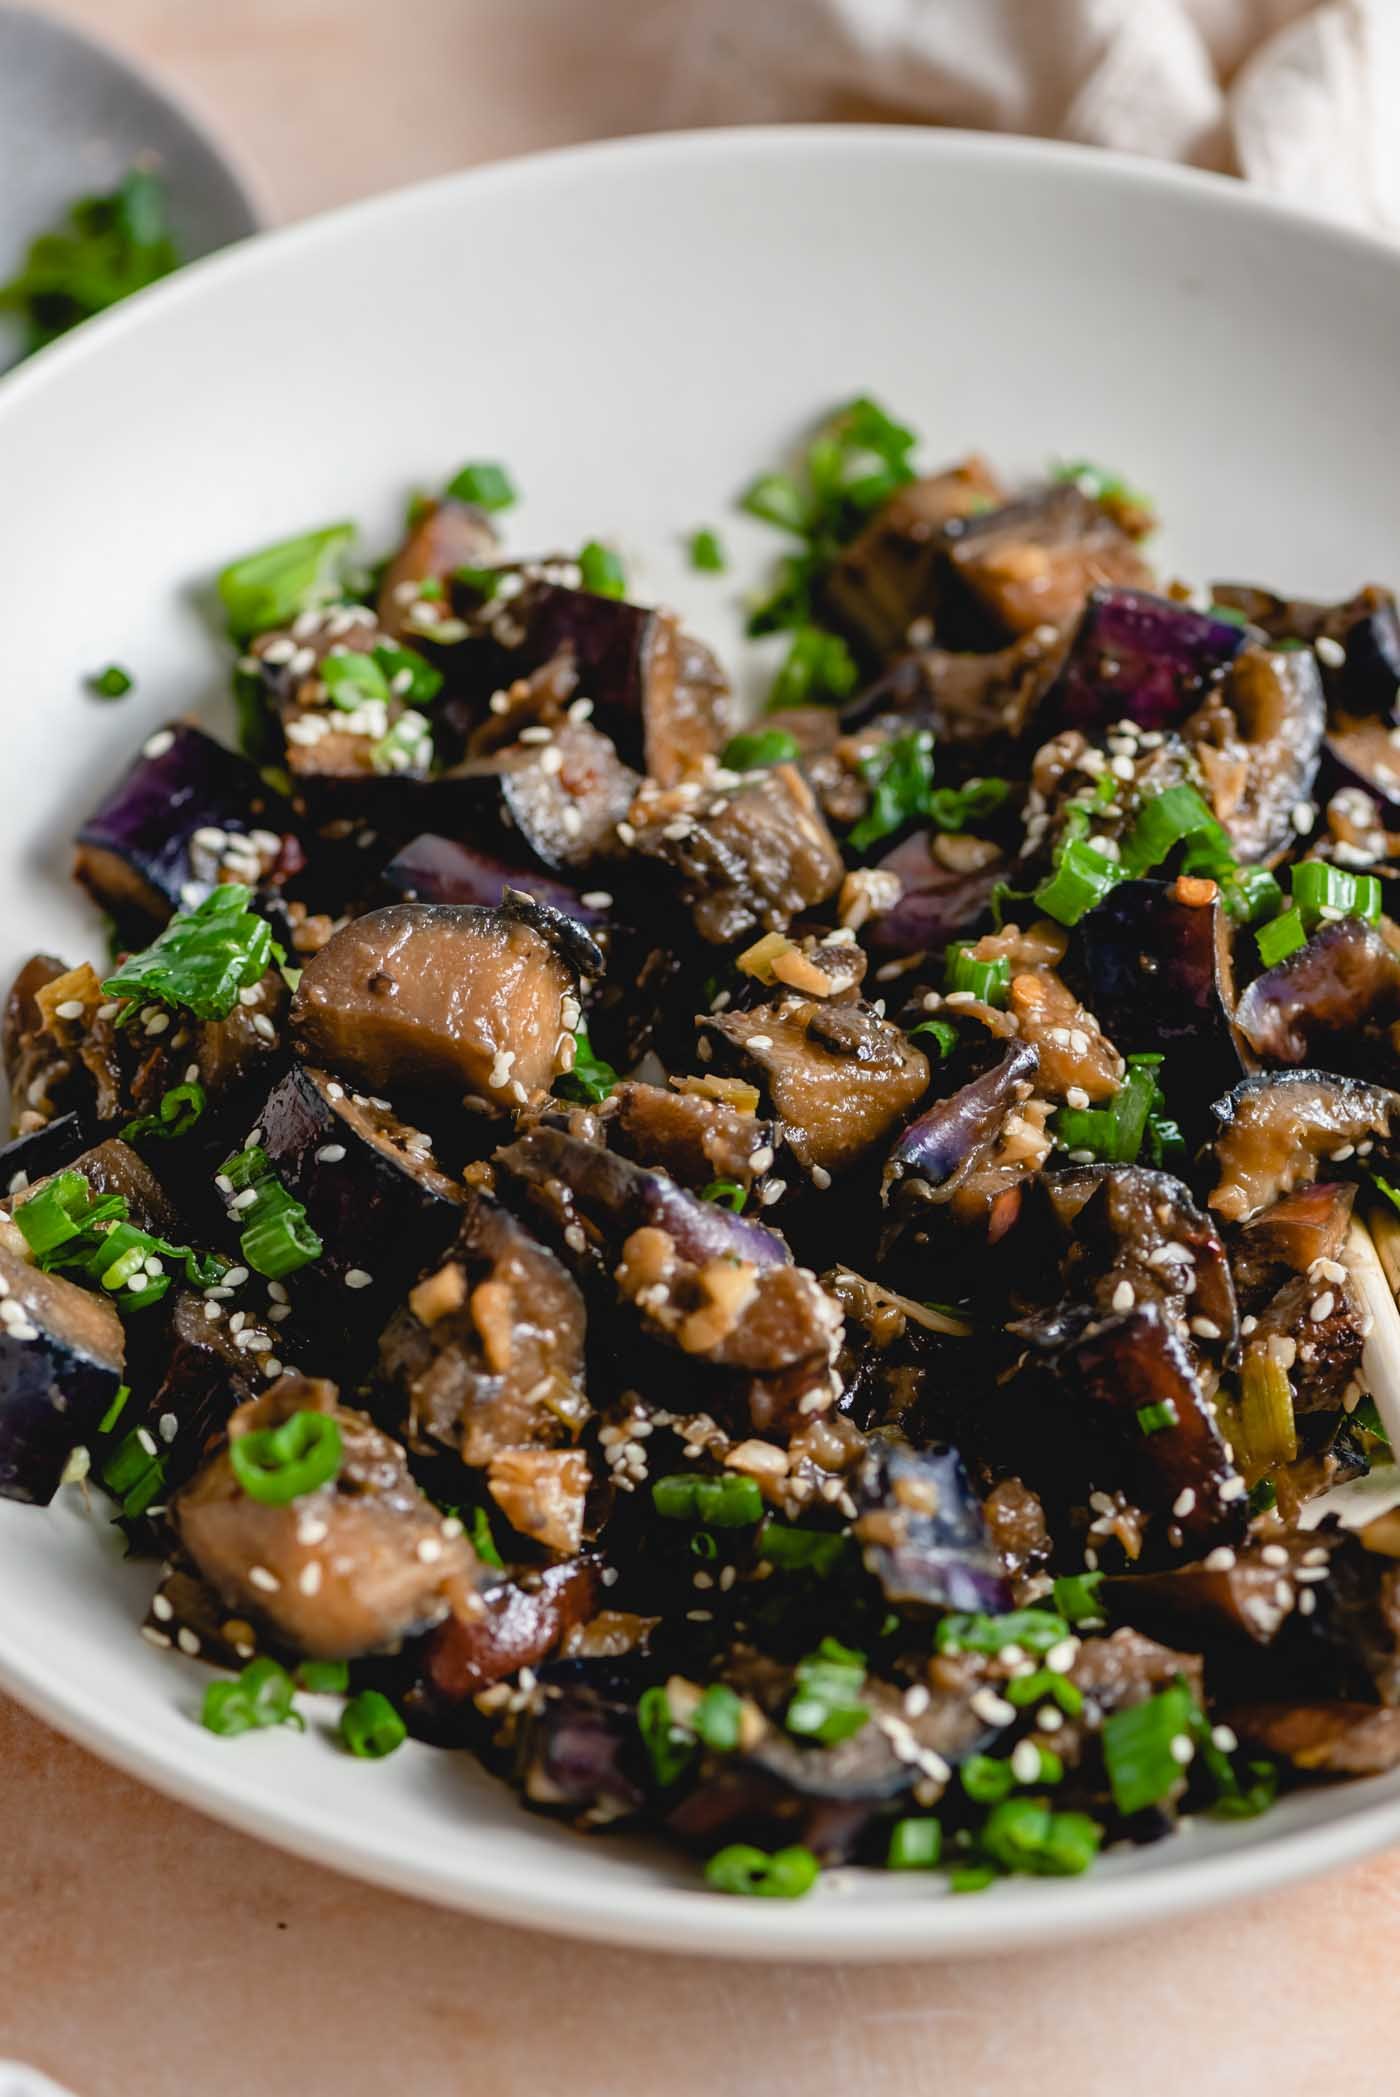 Stir fried eggplant with green onion and sesame seeds in a bowl.